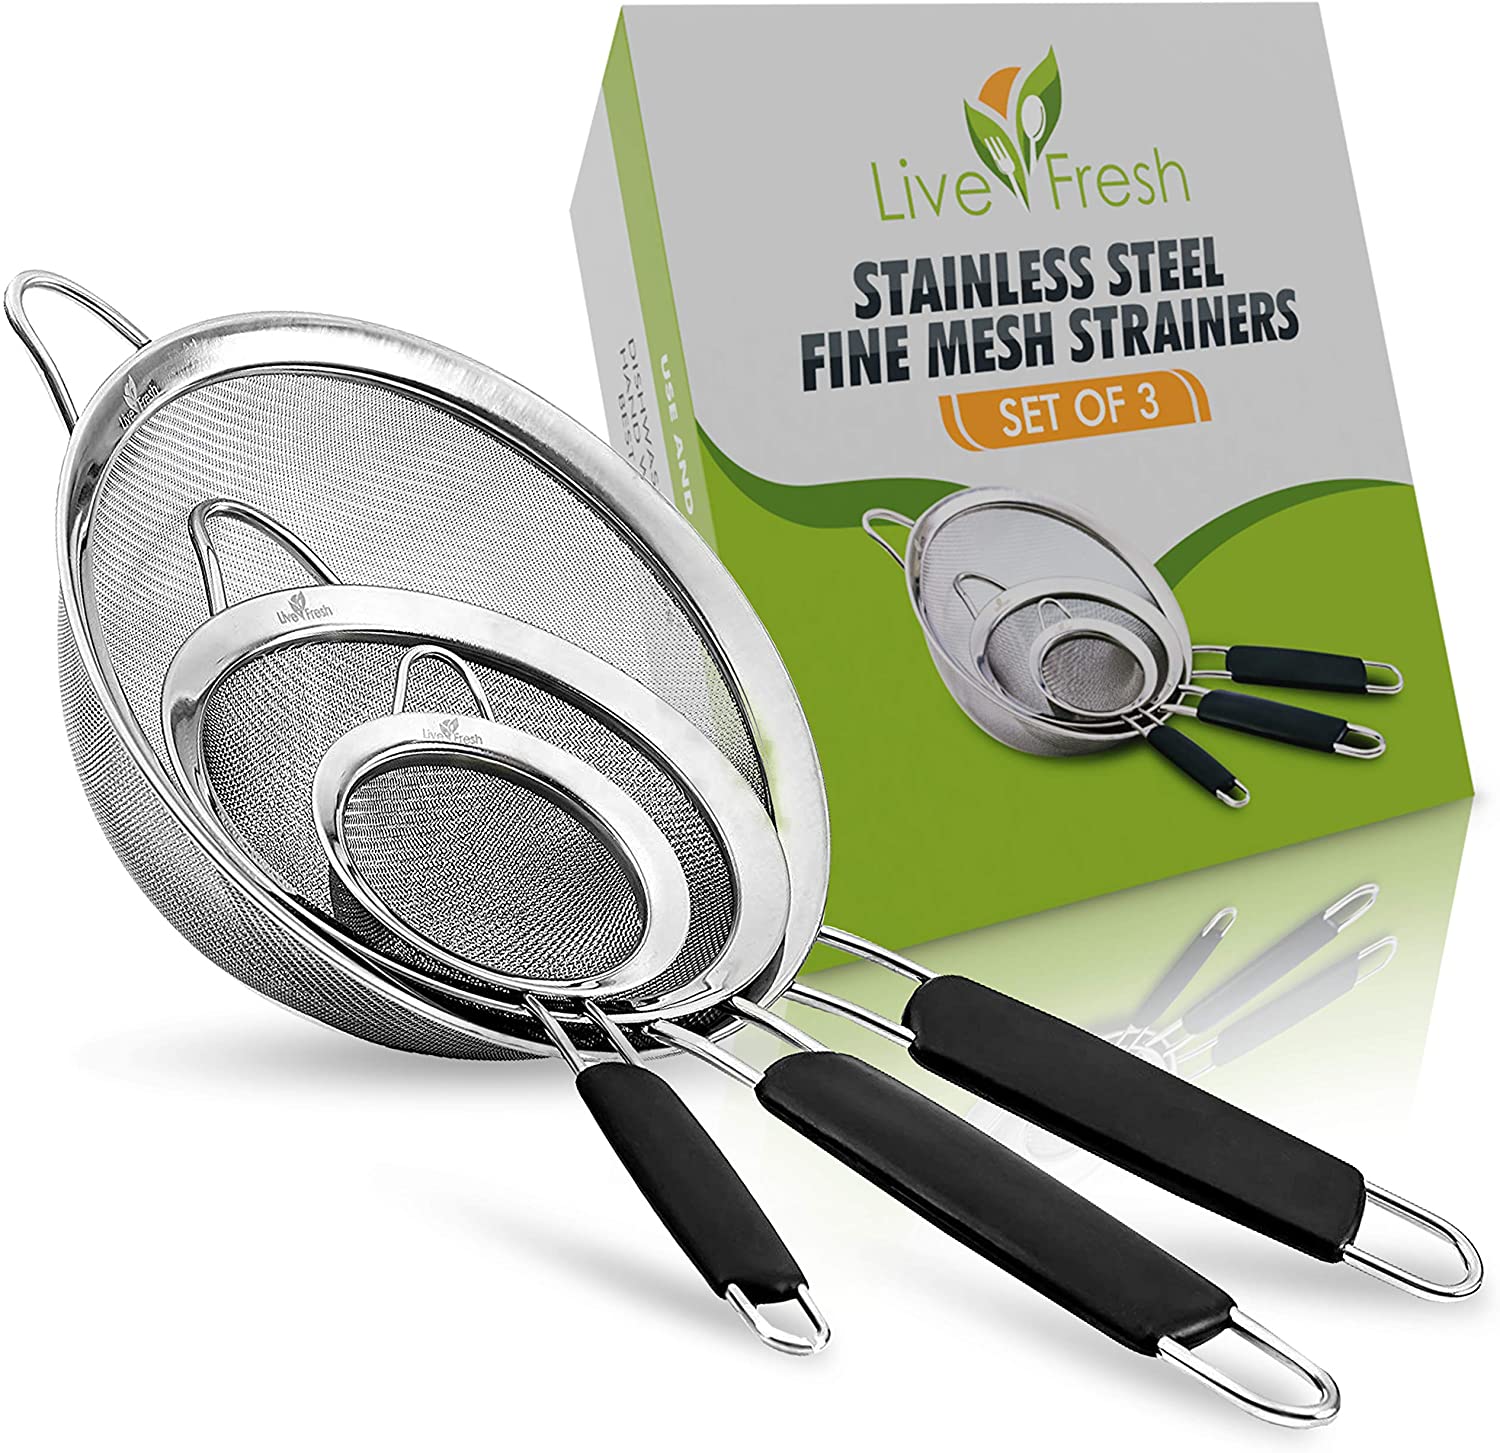 Kitchen Supply Strain Pastas & Tea U.S Drain and Rinse Vegetables 5.5 and 8 Sizes Pack of 2 Set of 4 Premium Quality Fine Mesh Stainless Steel Strainers 4 3 Sift 